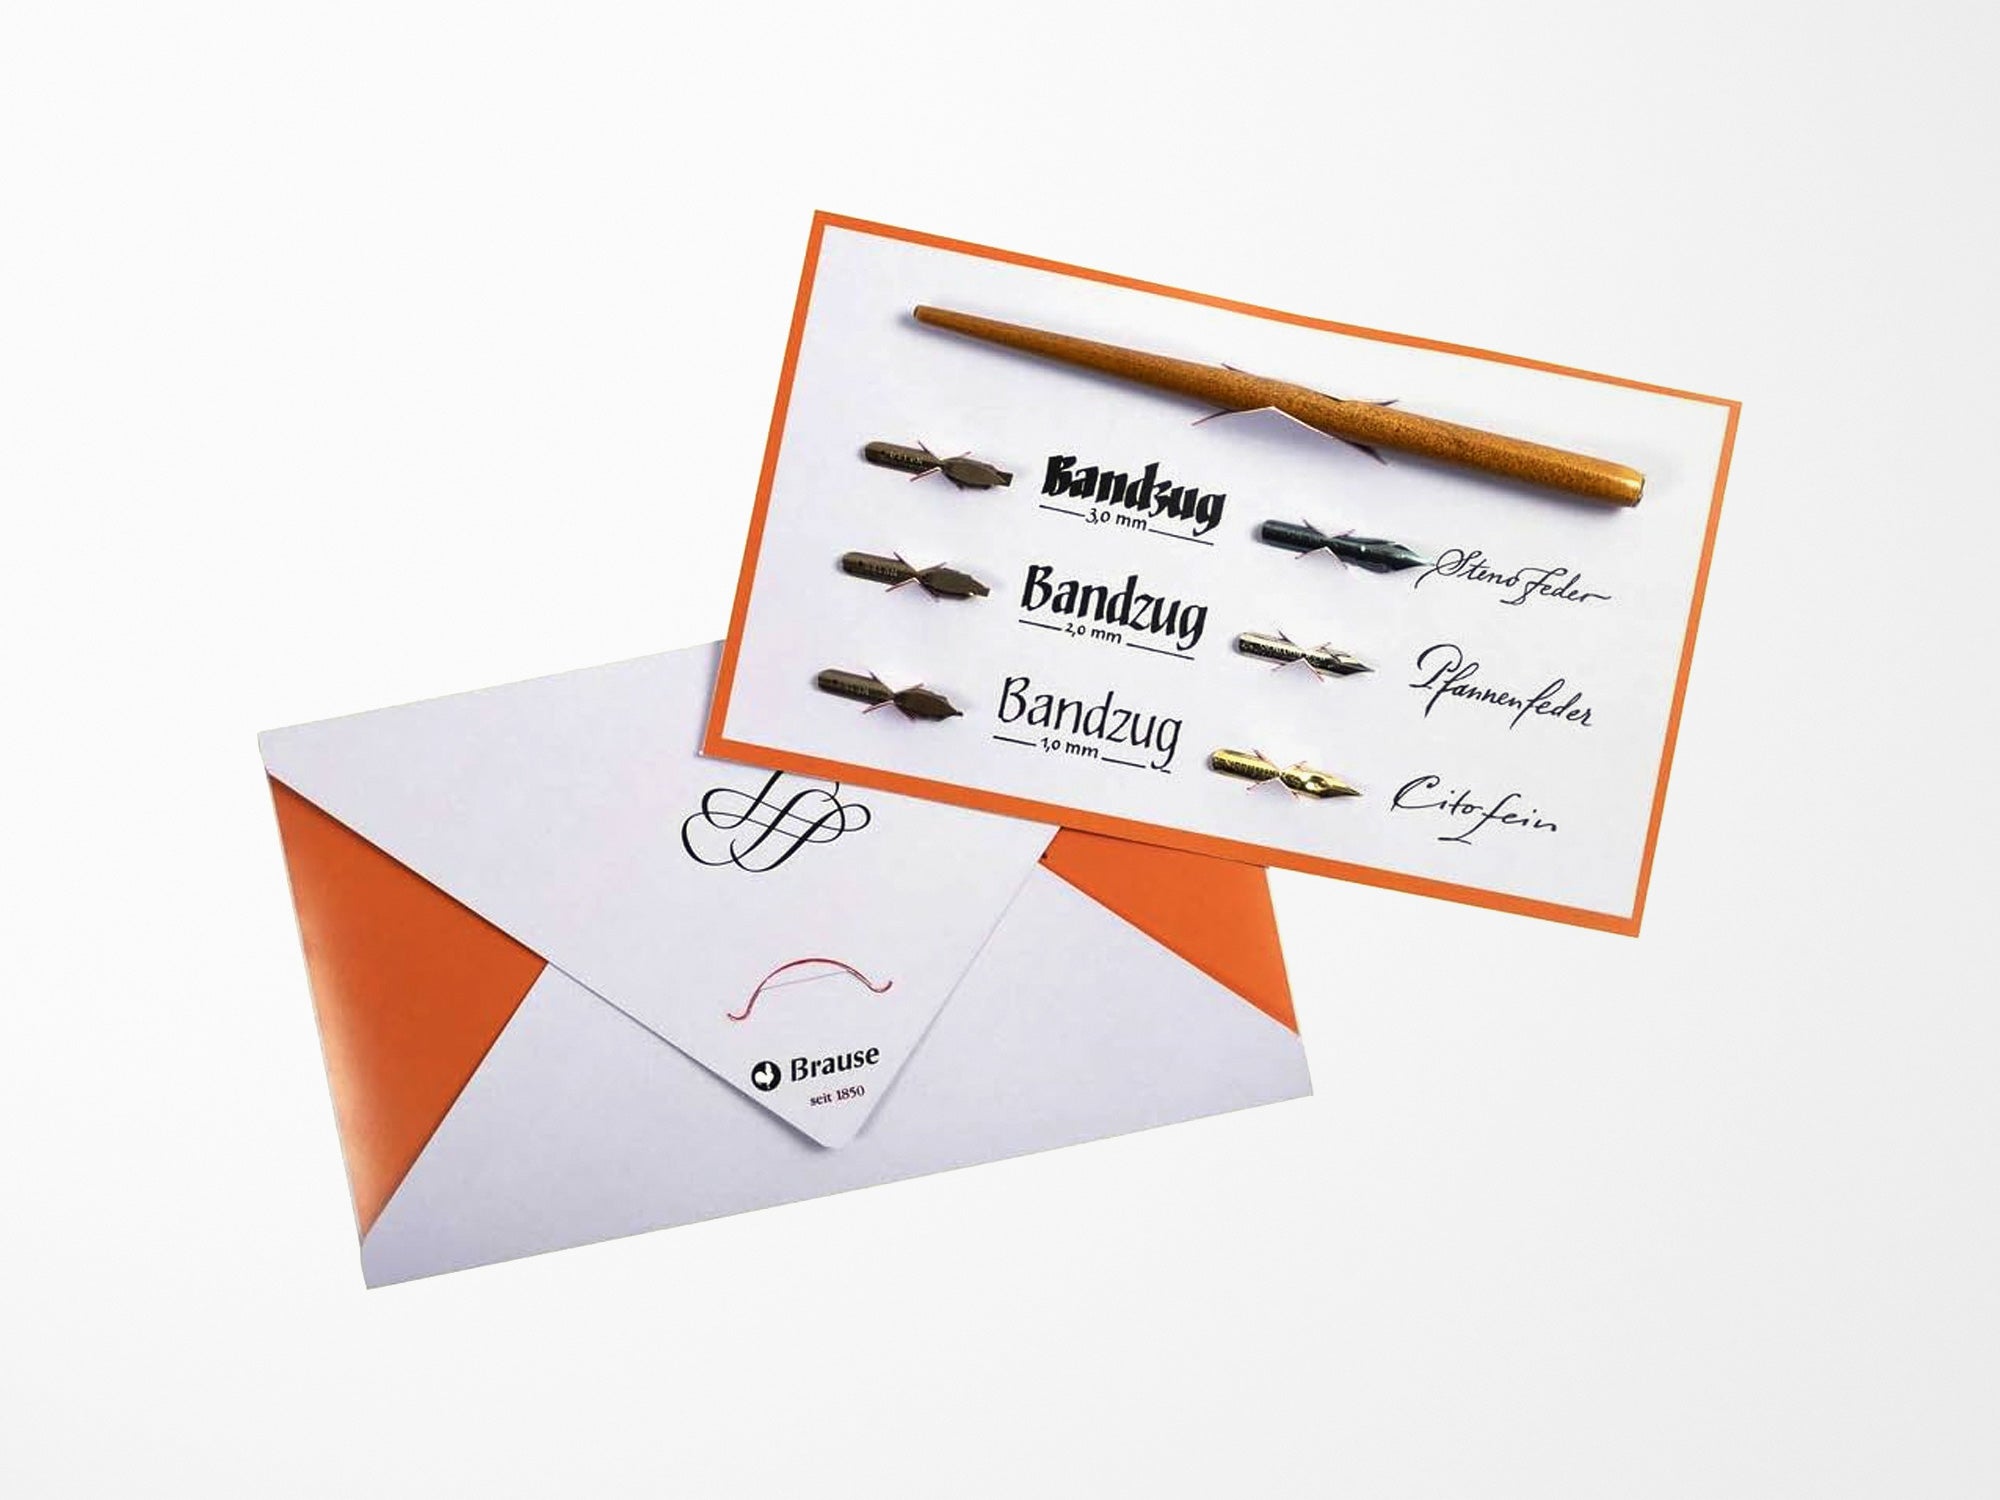 Brause Calligraphy Starter Kit Ready to ship from